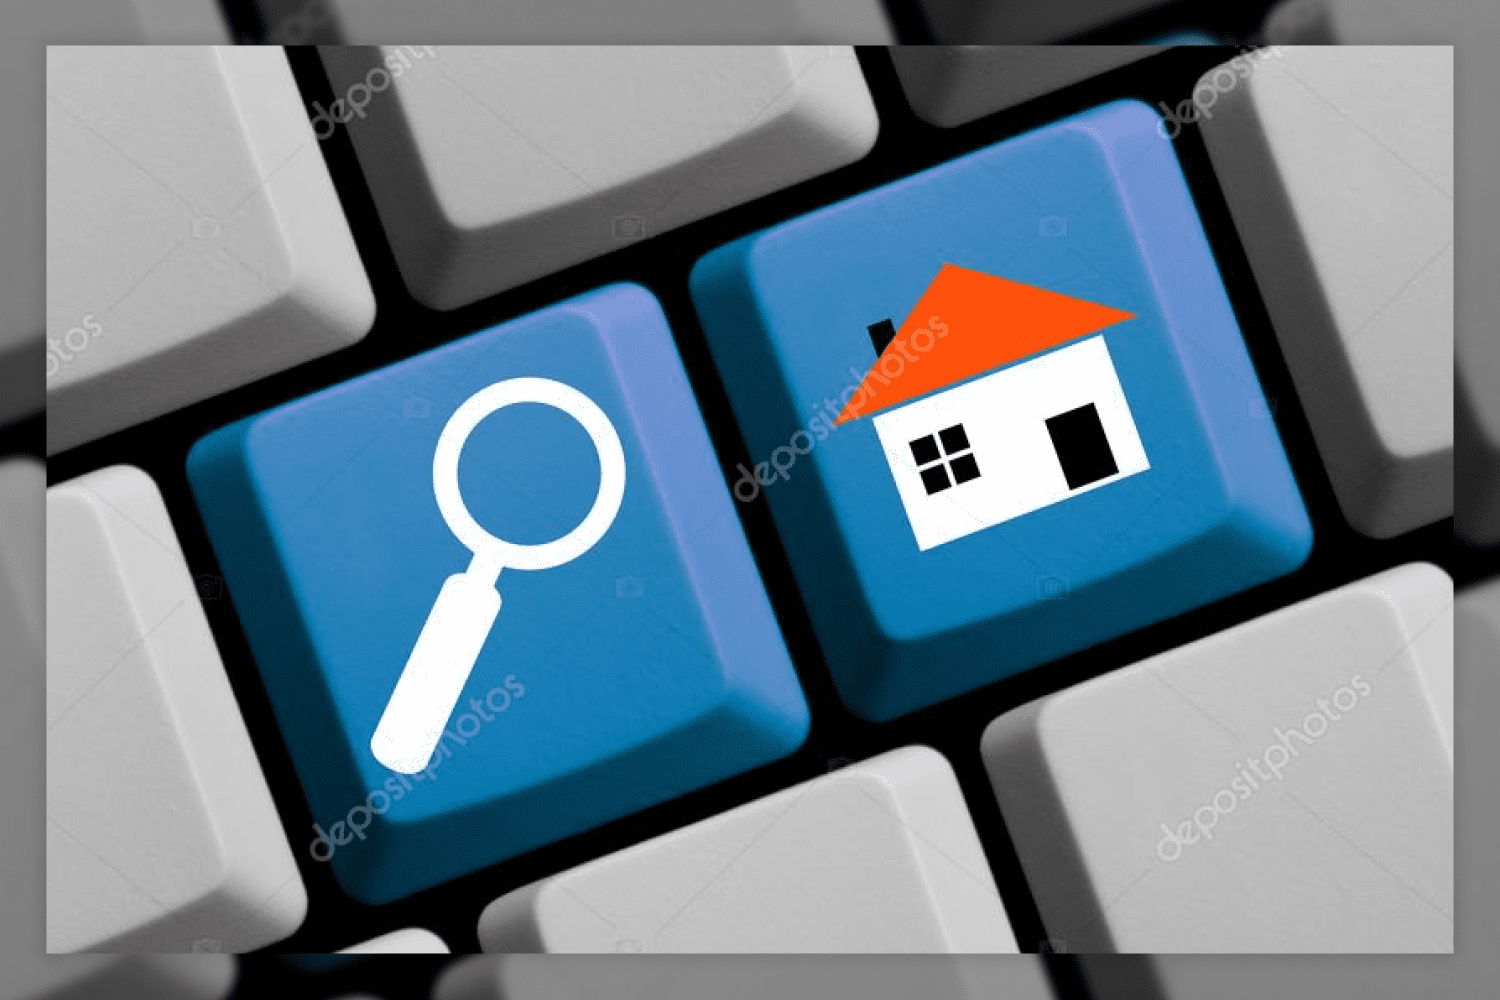 86 search for real estate keyboard 482